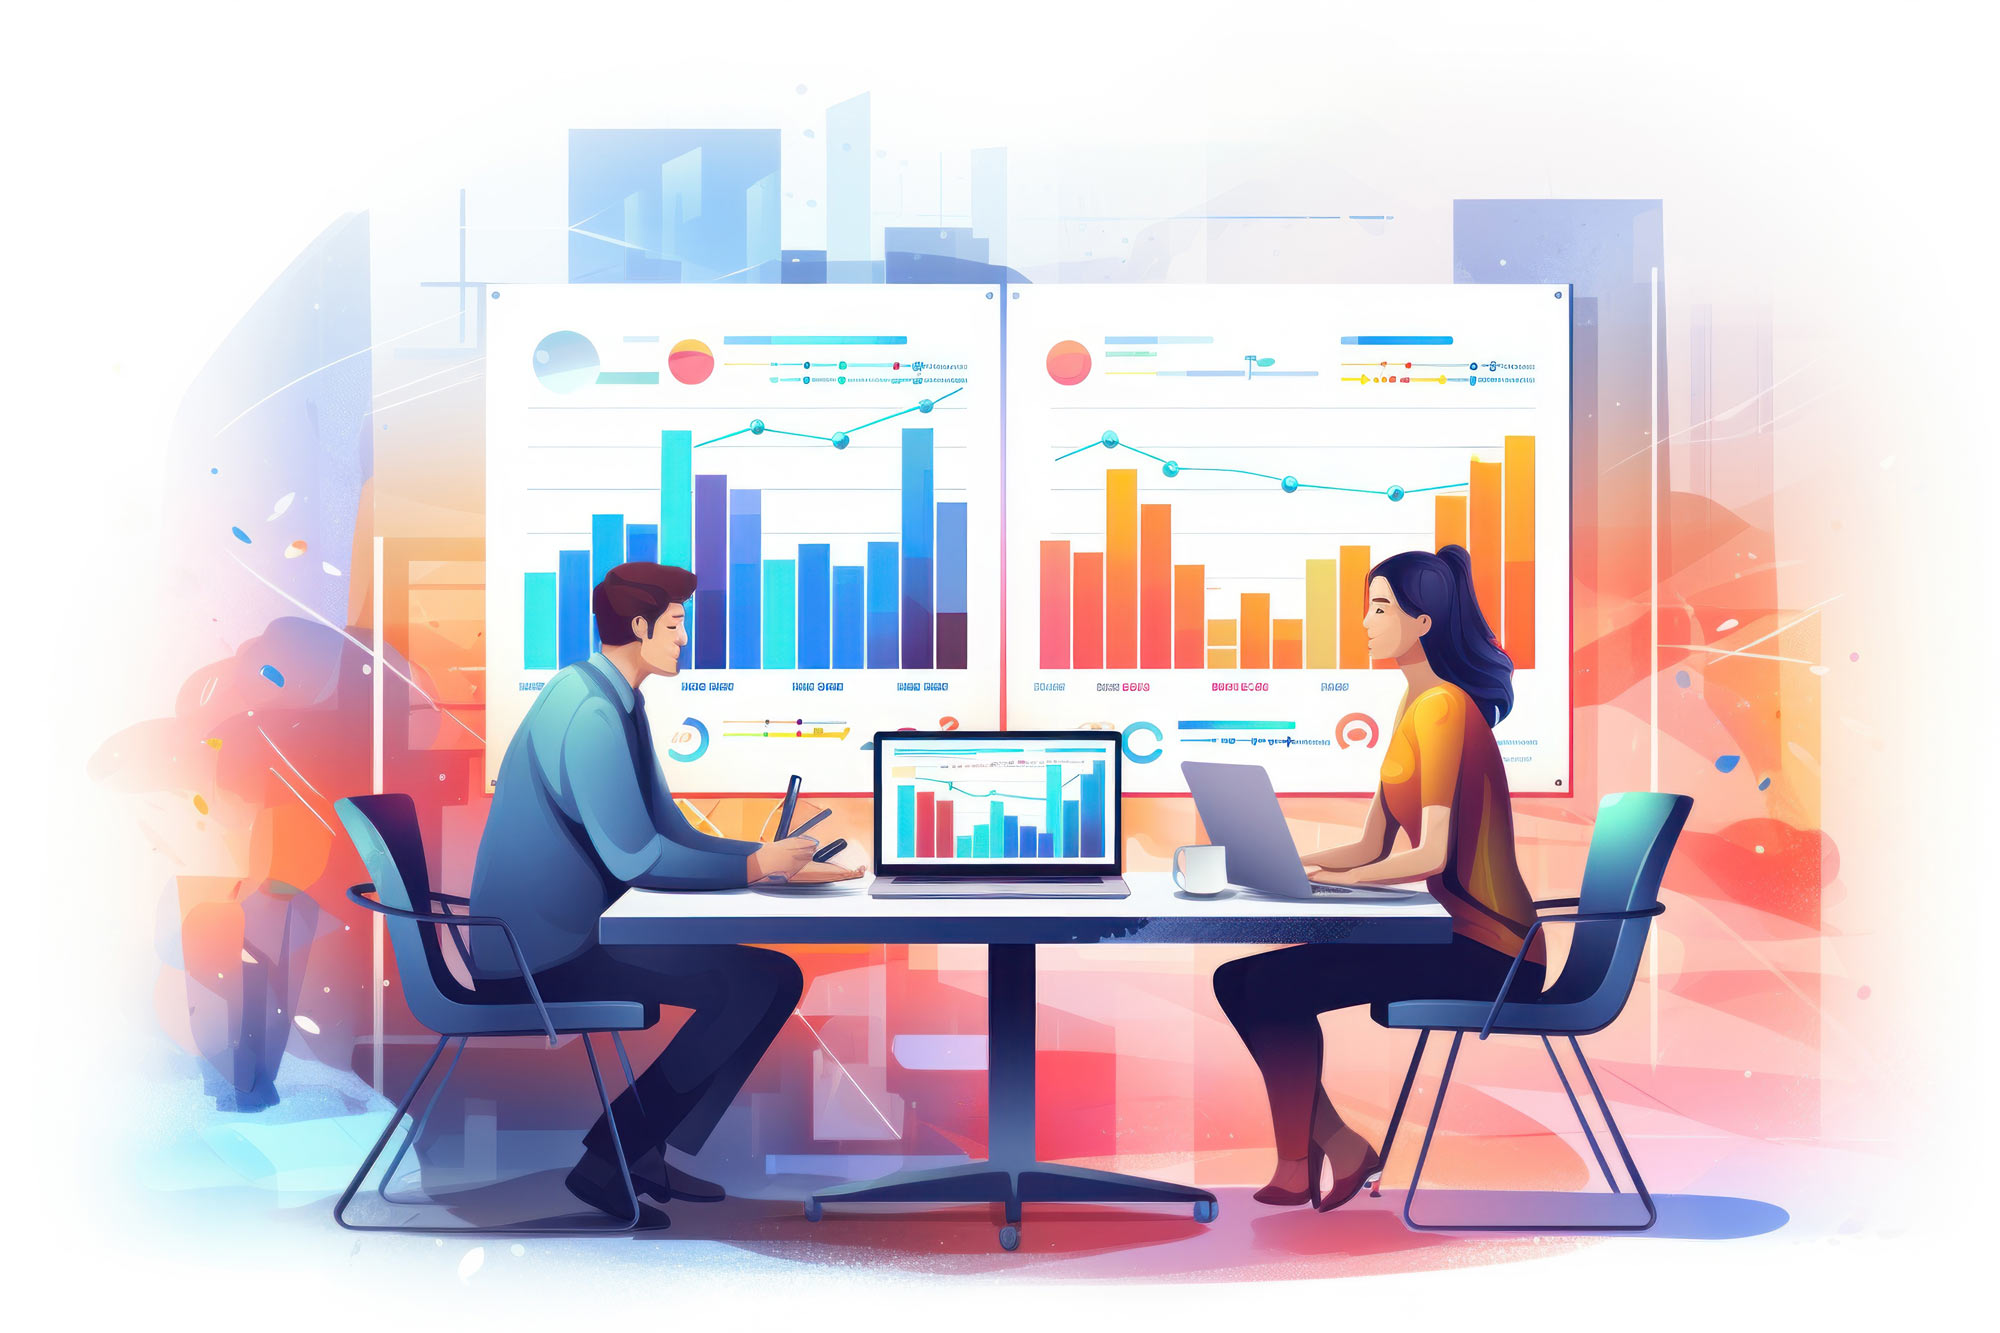 Stylized illustration of two people at a table going over data sets